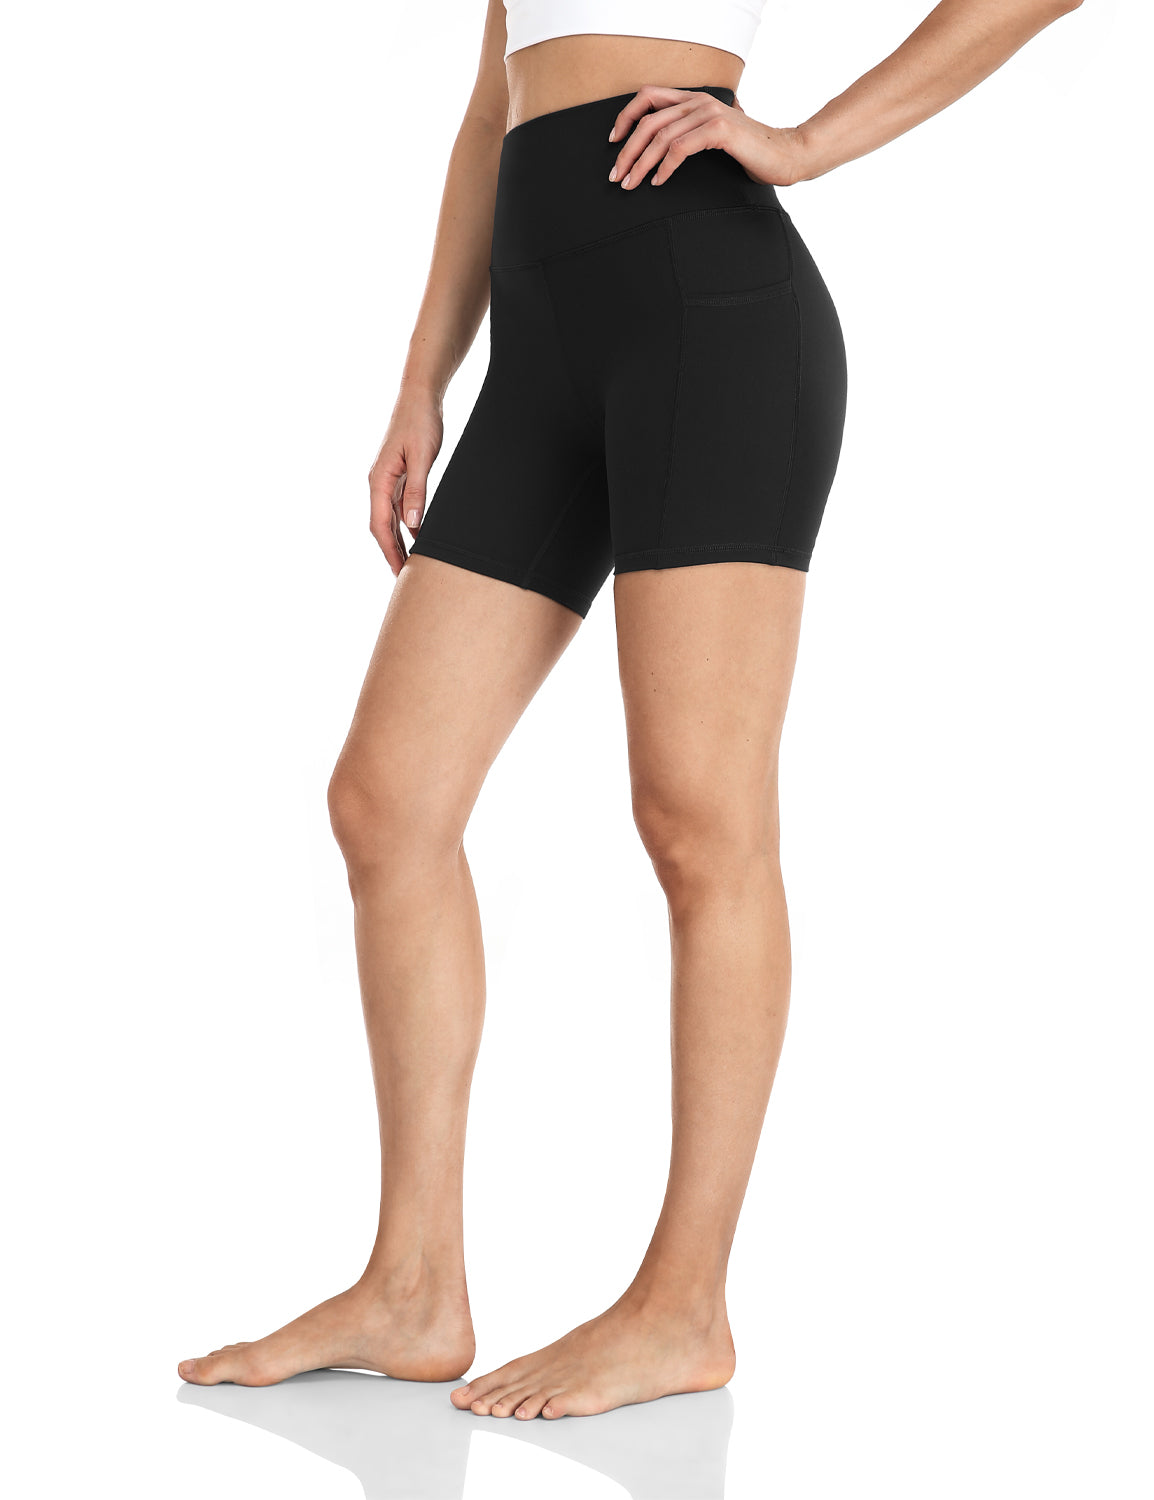 Trendy ShoSho Yoga Shorts with Pockets-2 Pack